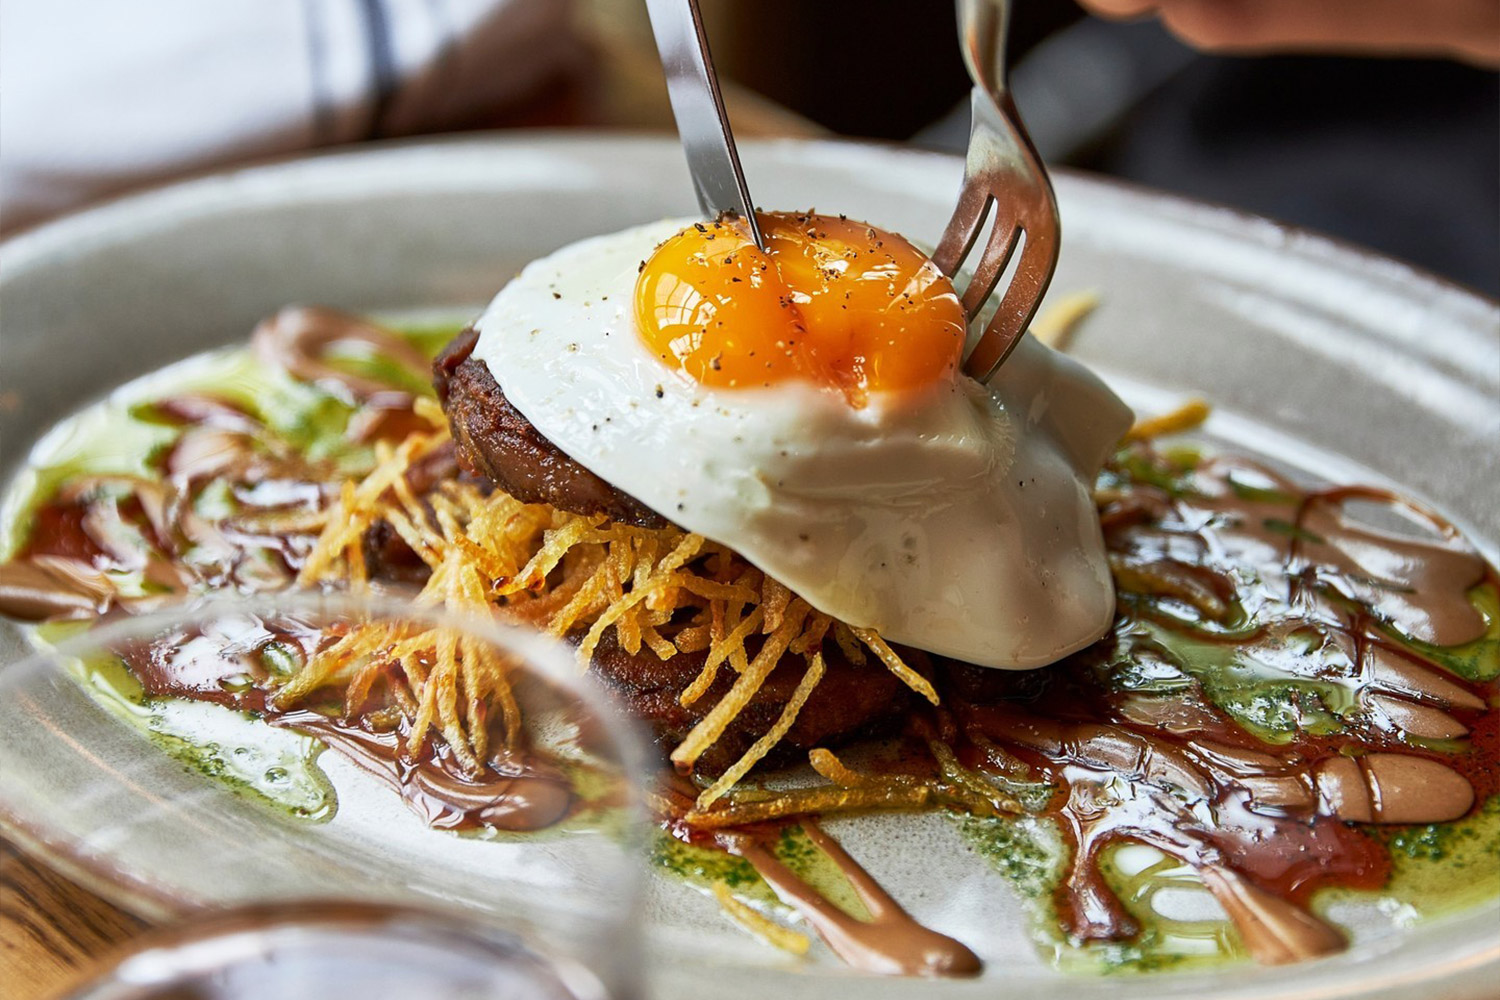 Brunch dish showing someone cutting into the yolk of an egg on top